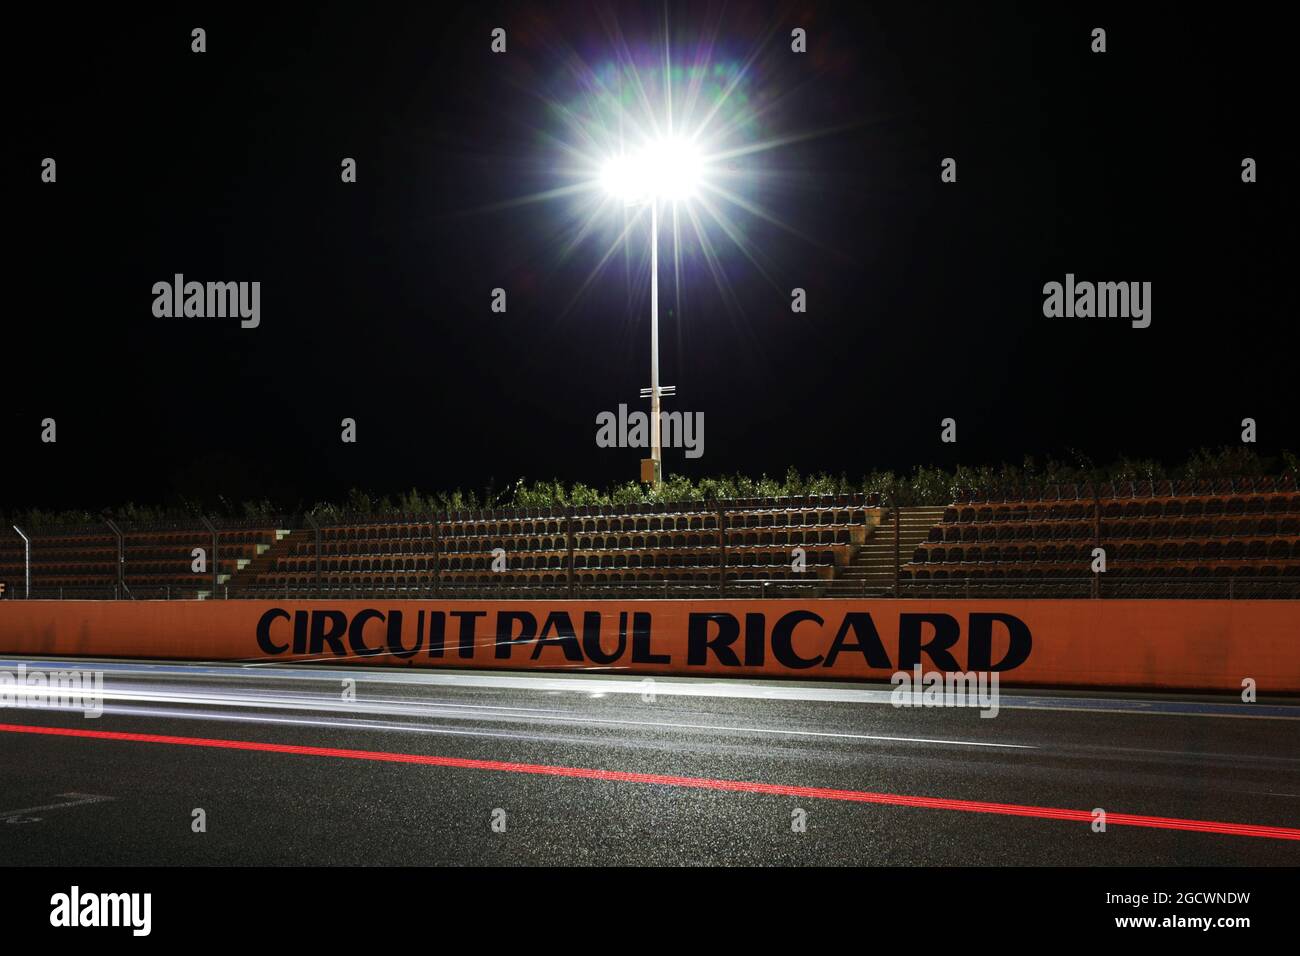 The circuit at night. FIA World Endurance Championship, 'Prologue' Official Test Days, Friday 25th March 2016. Paul Ricard, France. Stock Photo